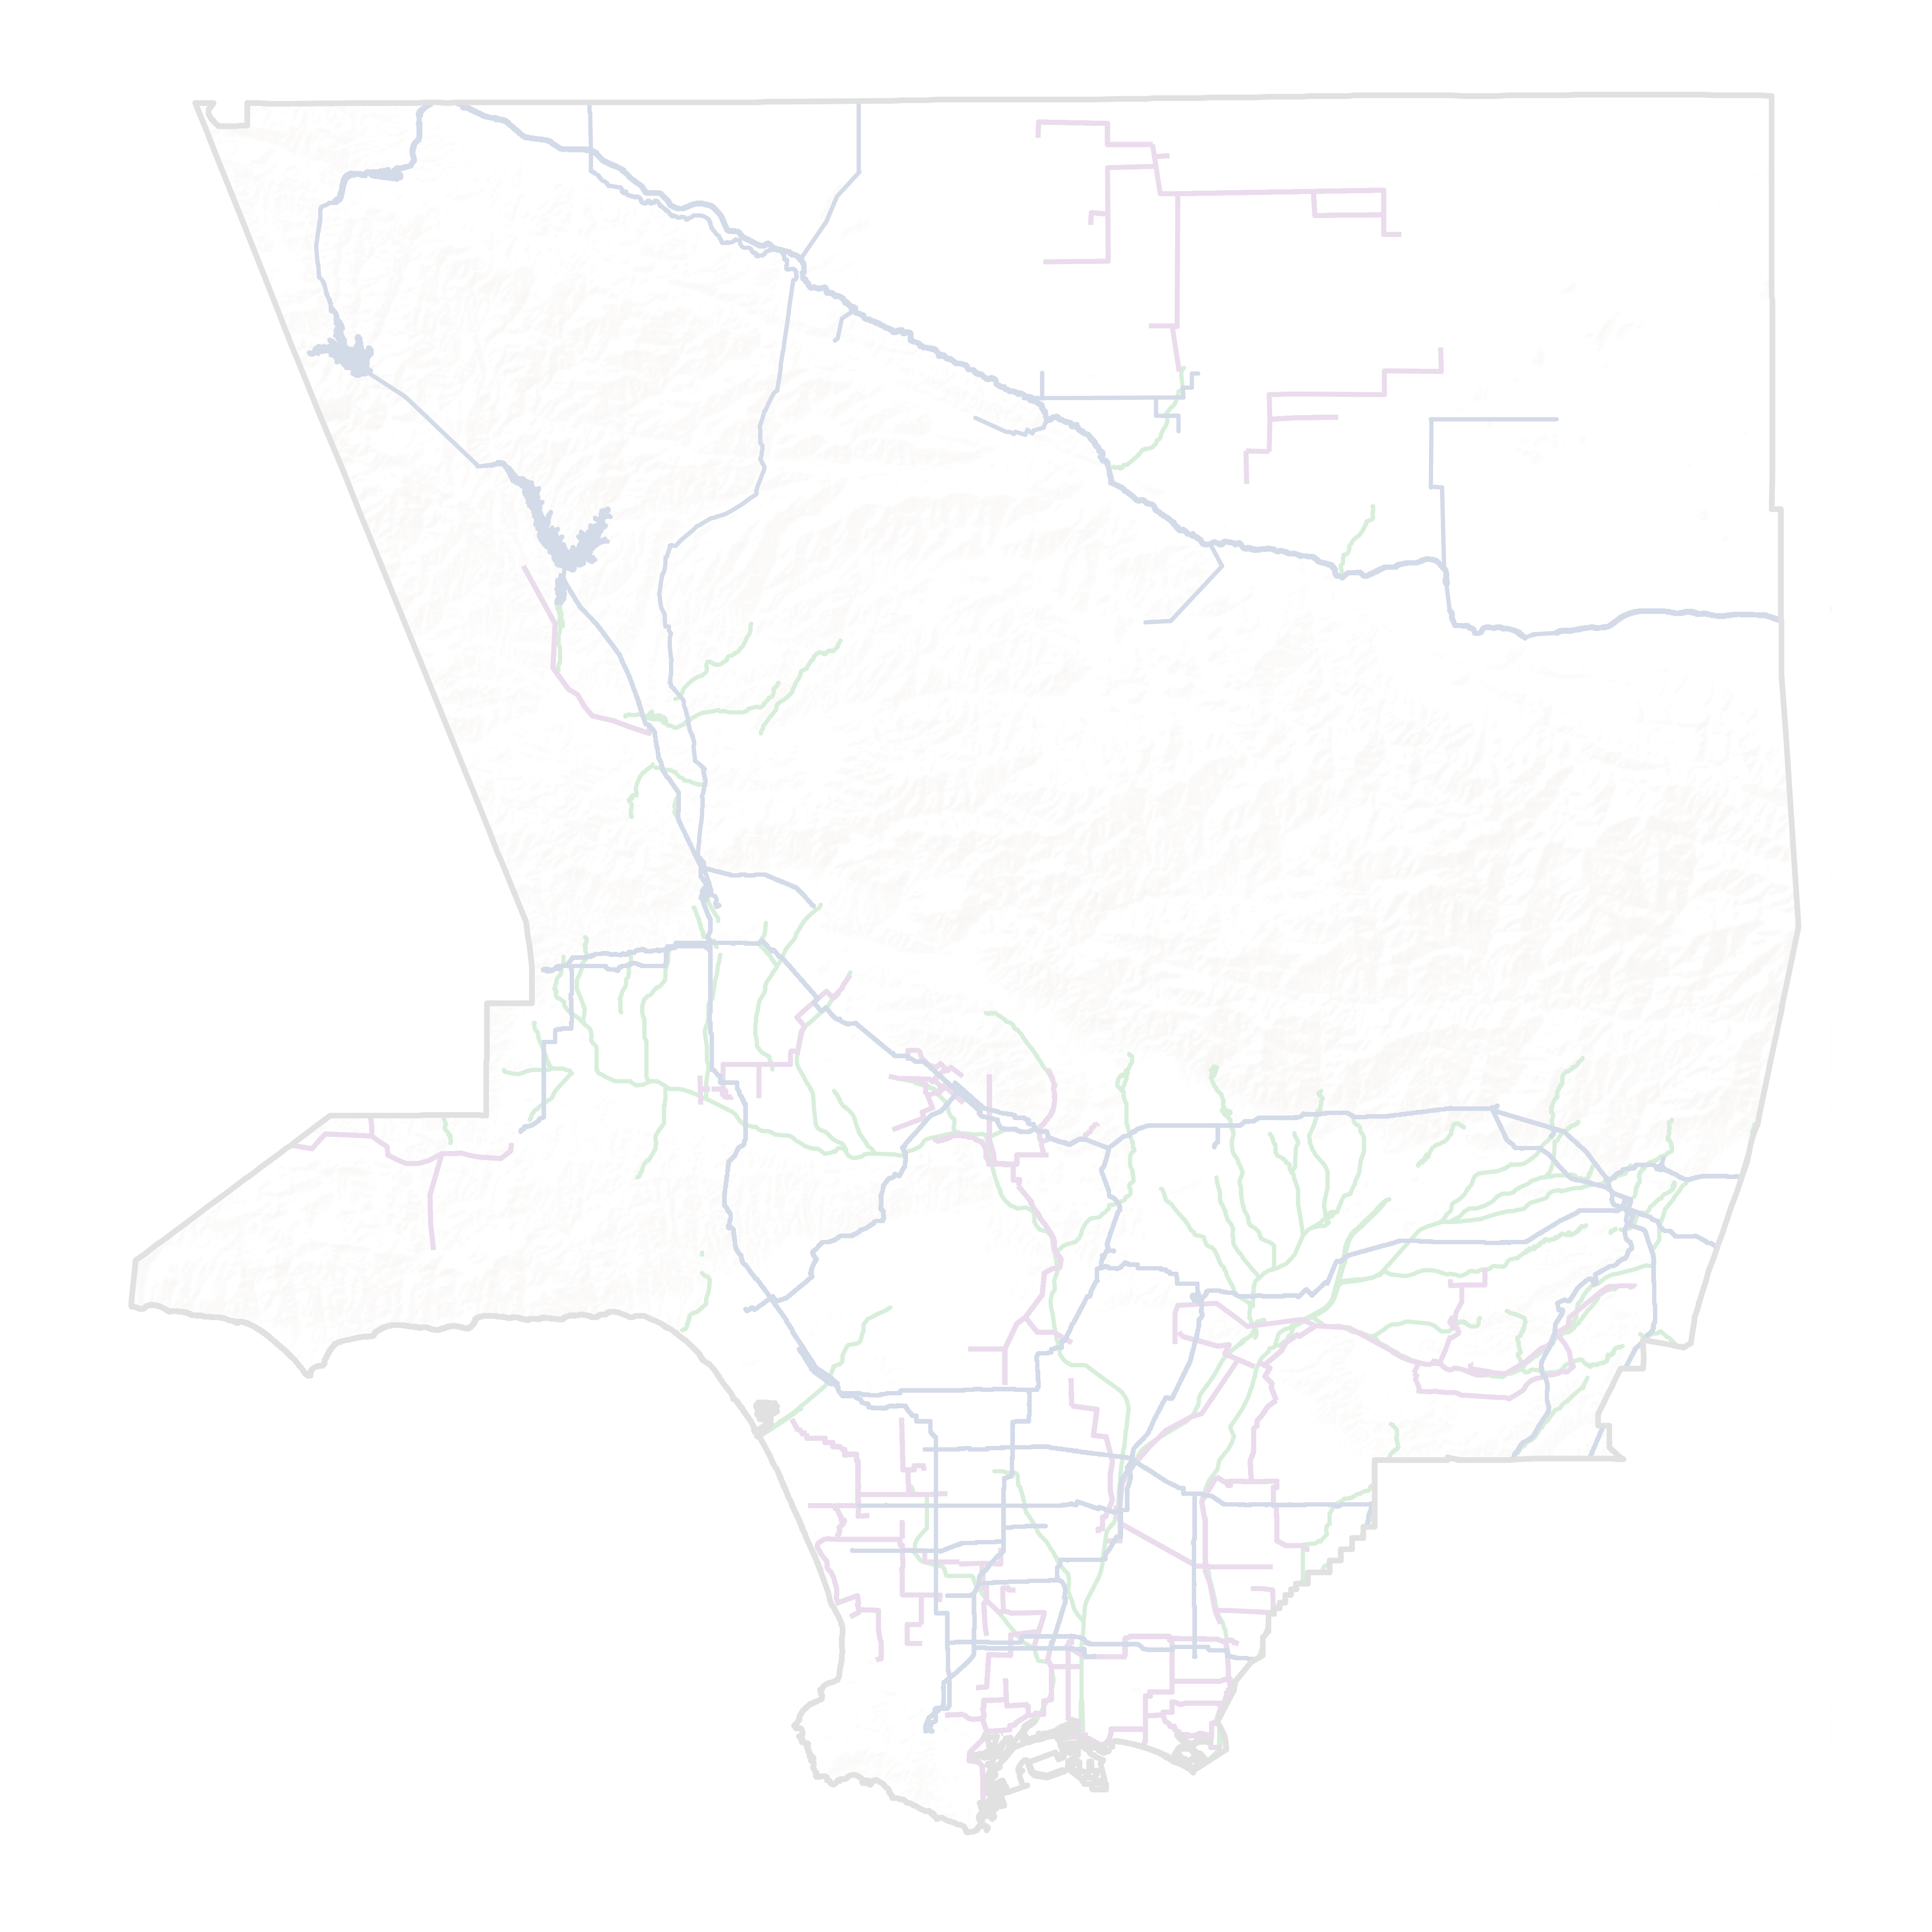 A map of LA county that showcases different rivers and recycled water pipeline alignments in LA county